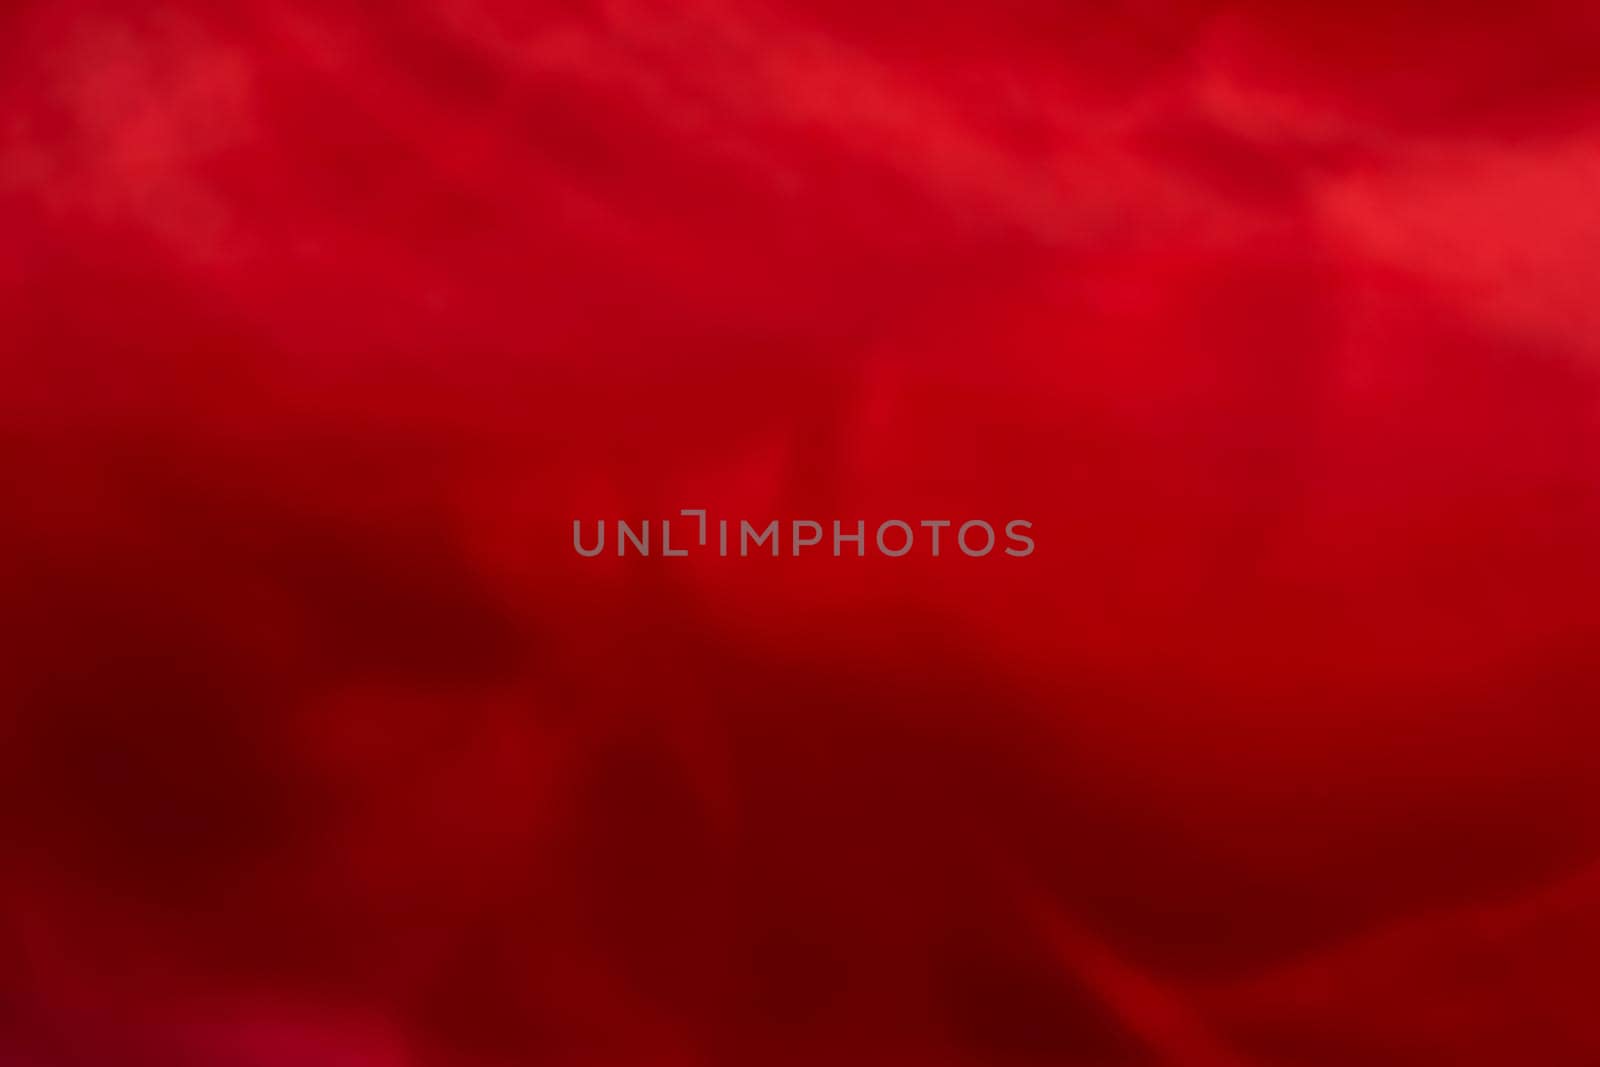 Holiday branding, beauty glamour and cyber backgrounds concept - Red abstract art background, silk texture and wave lines in motion for classic luxury design